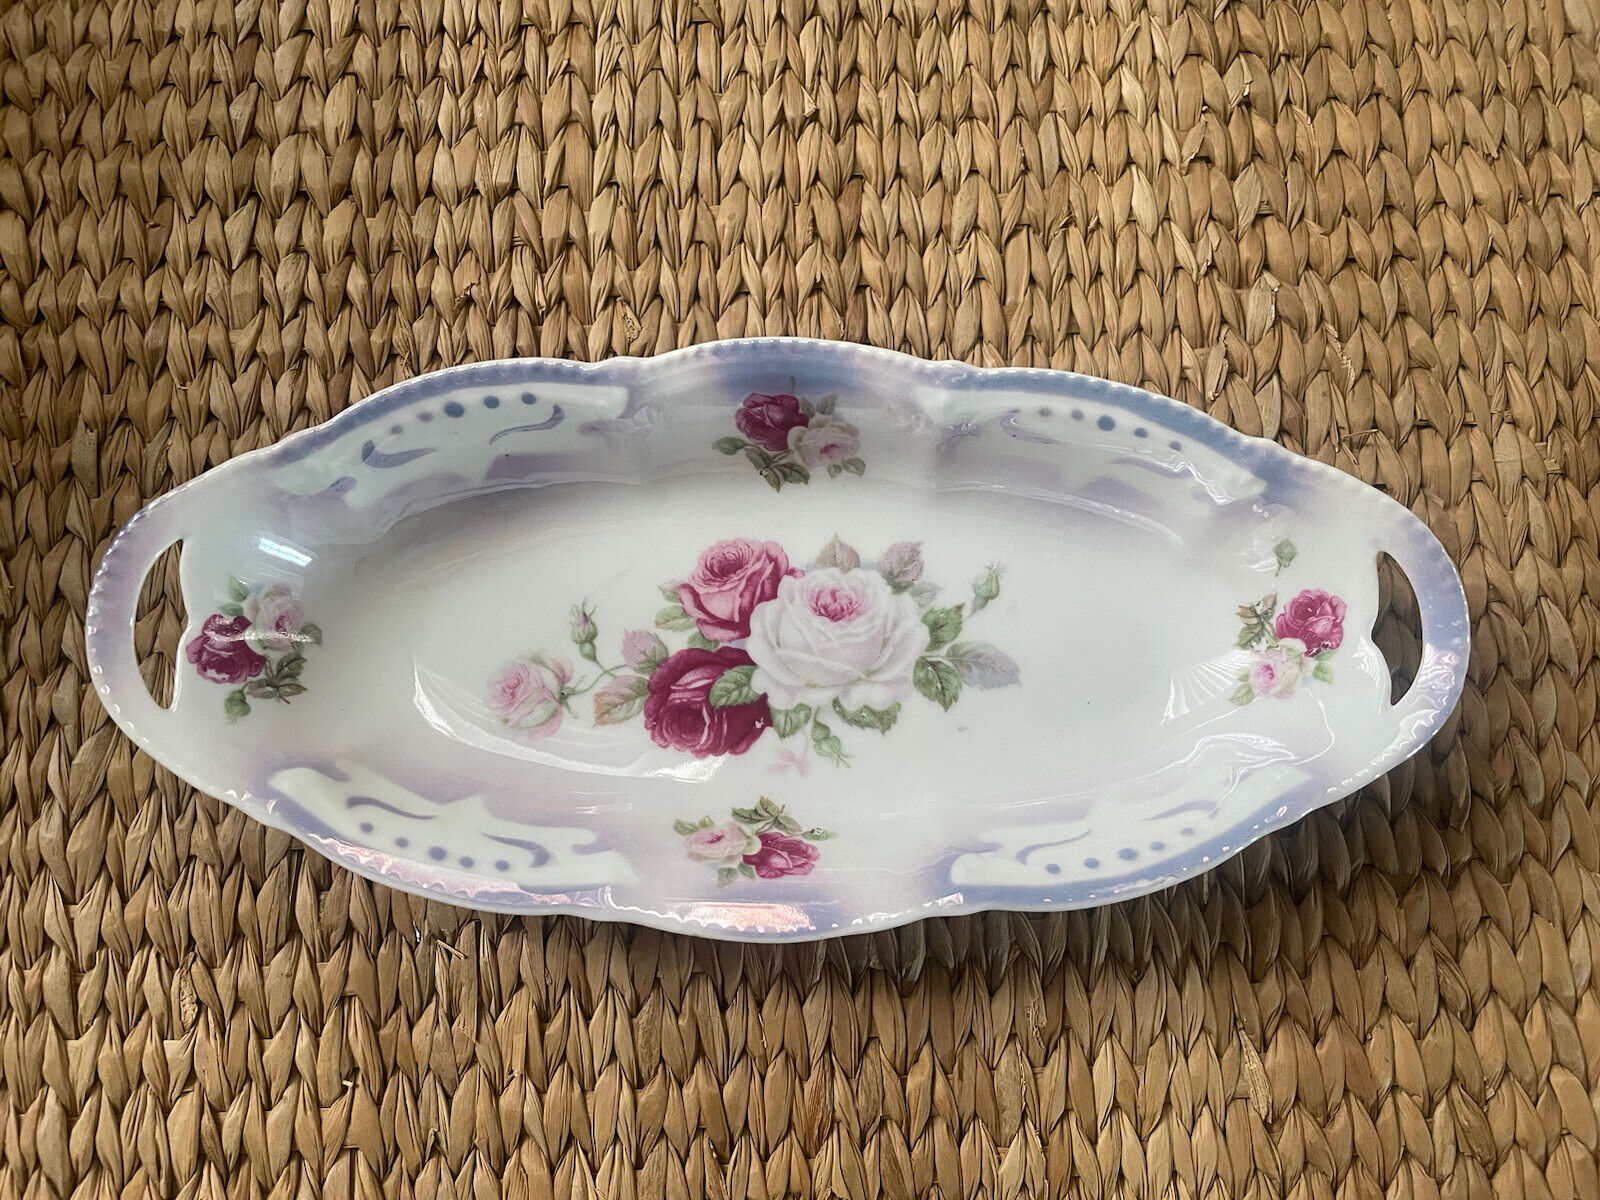 Beautiful German Dish, handles are open on both sides, painted Roses on inside.